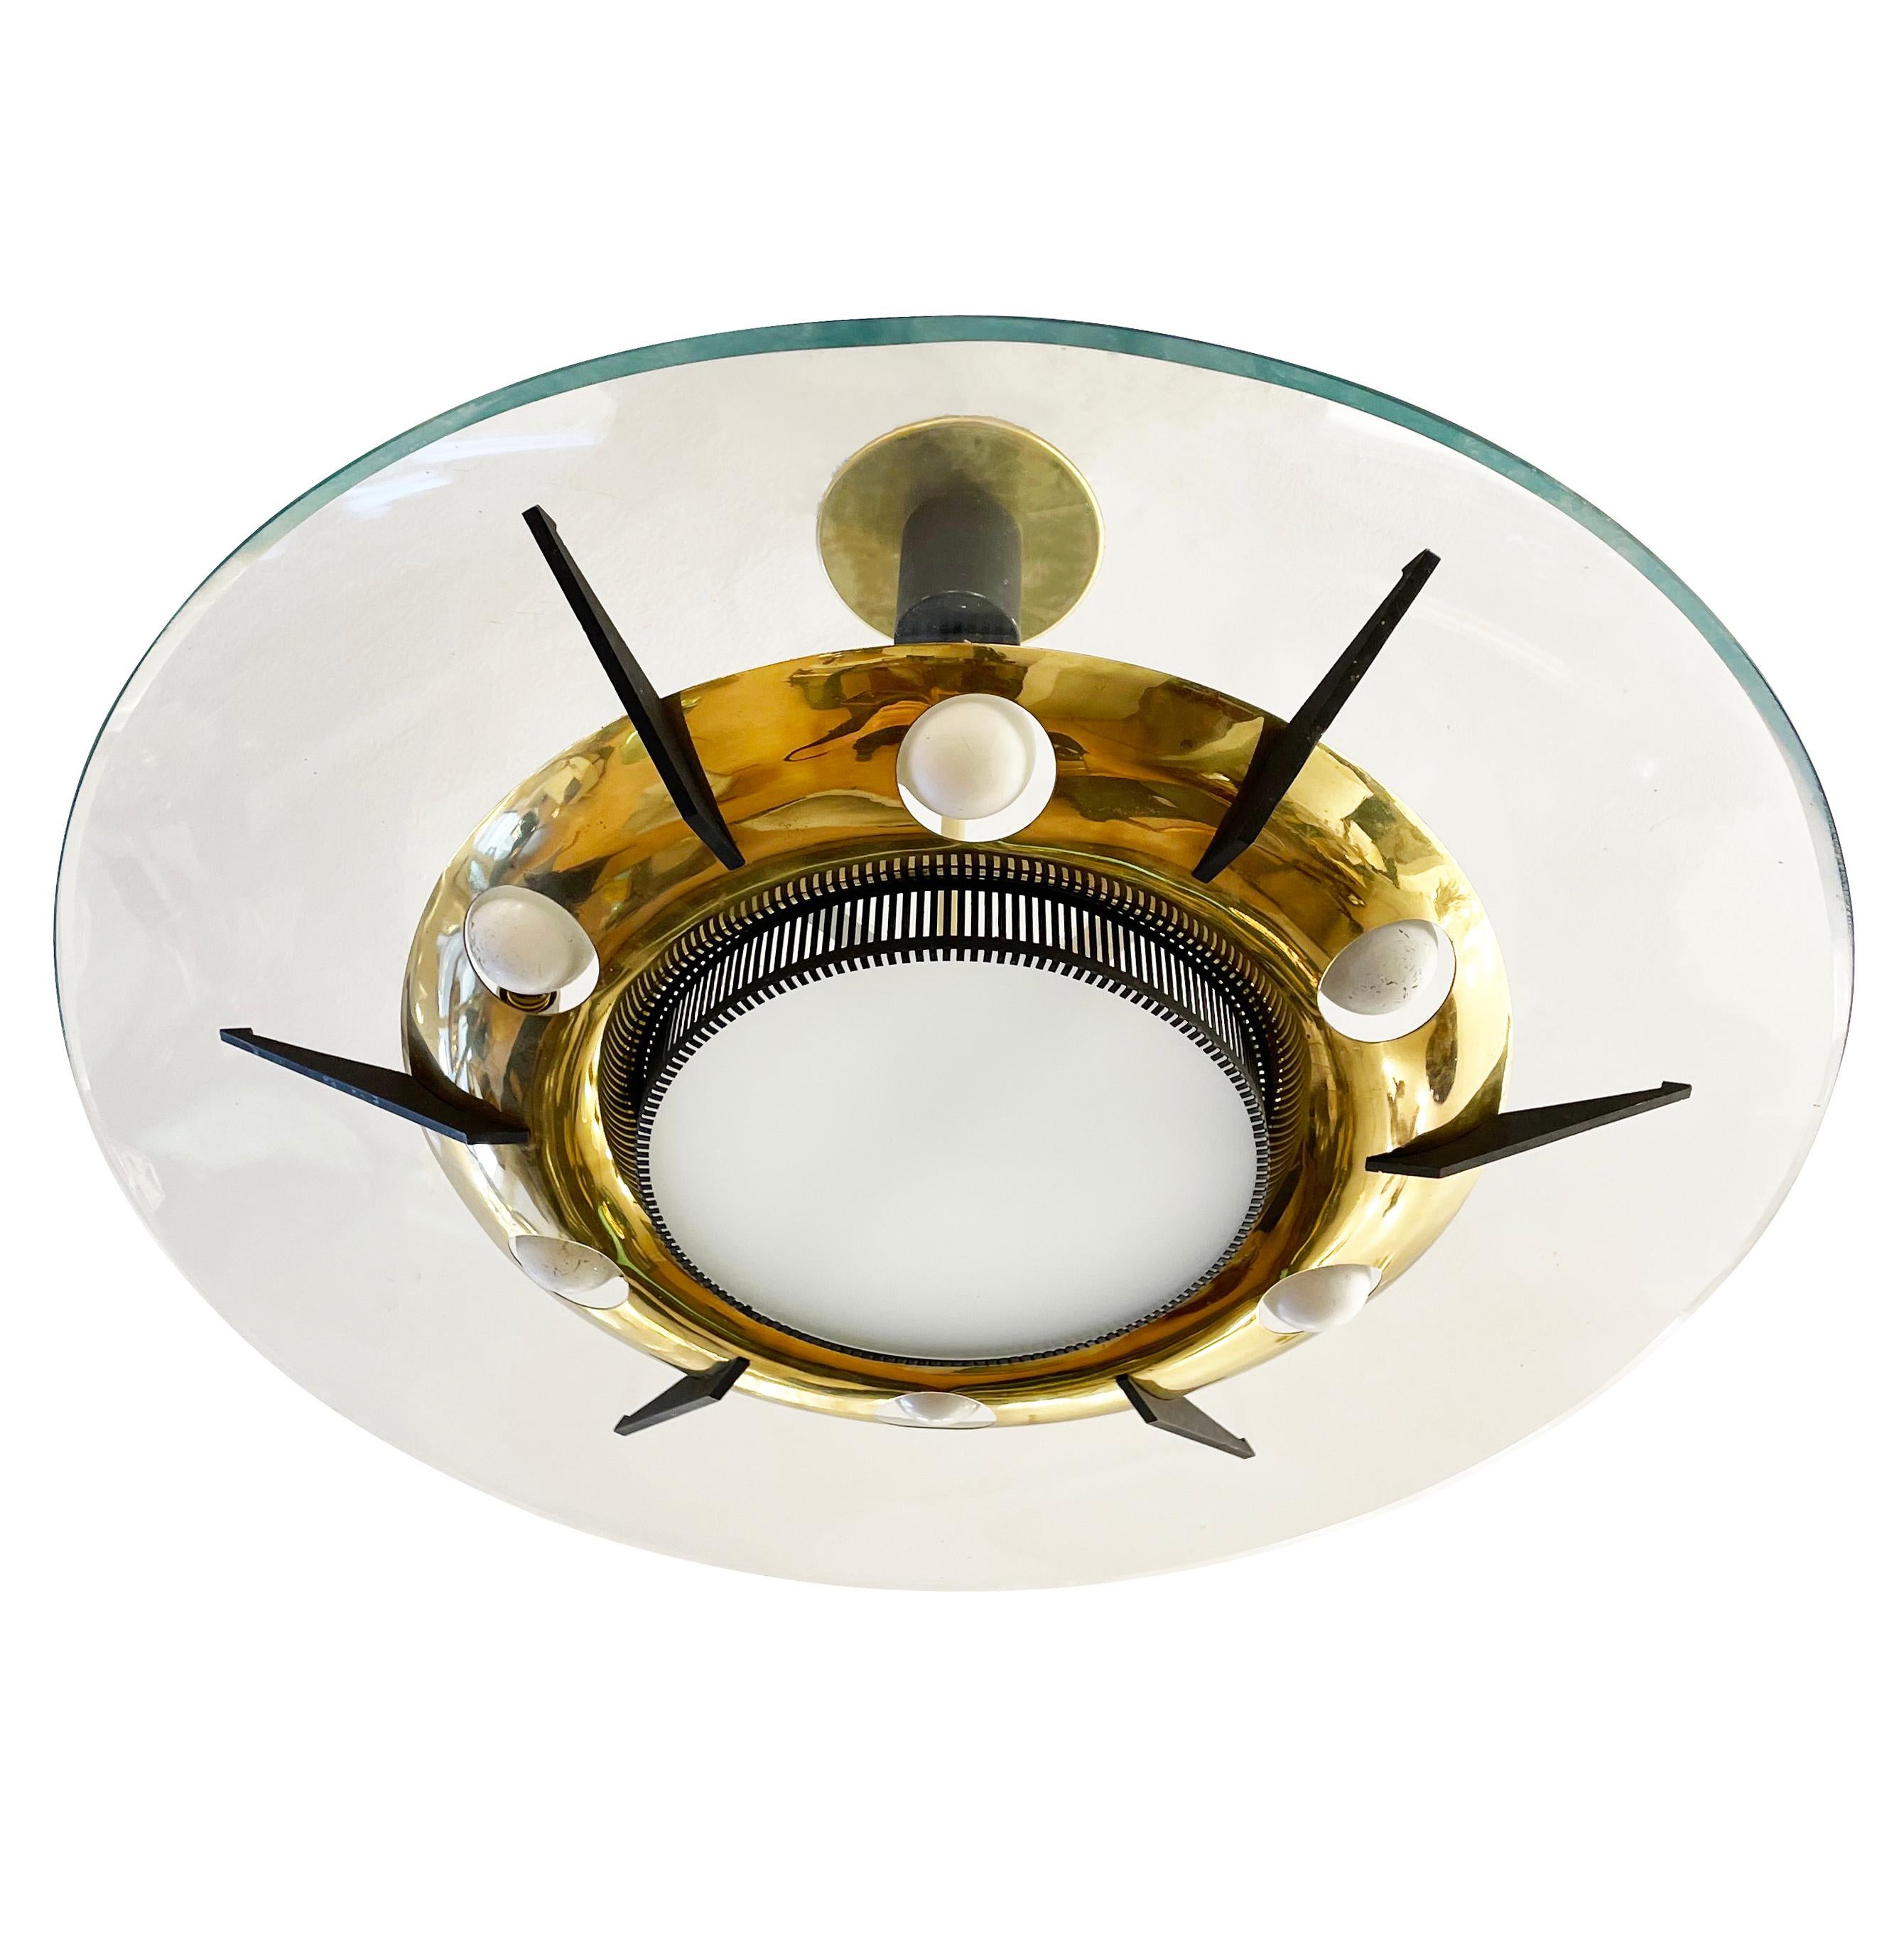 Italian midcentury chandelier by Stilnovo with a bras frame housing six light sources and a central frosted glass diffuser with an additional two light sources. Six supports protruding from the brass frame hold a large clear glass. Height of stem